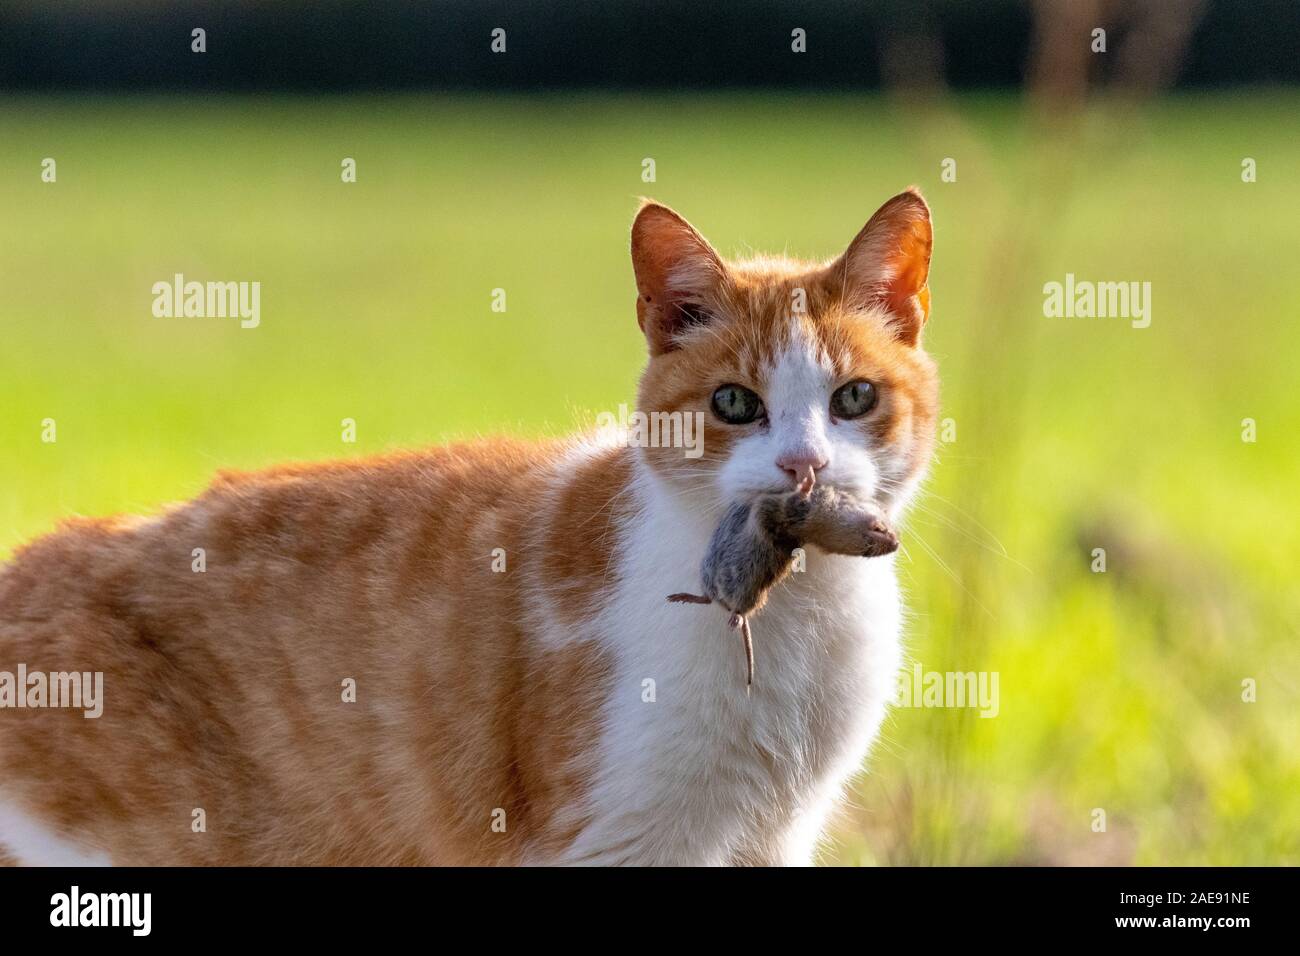 Feral cat holding rodent prey in mouth Stock Photo